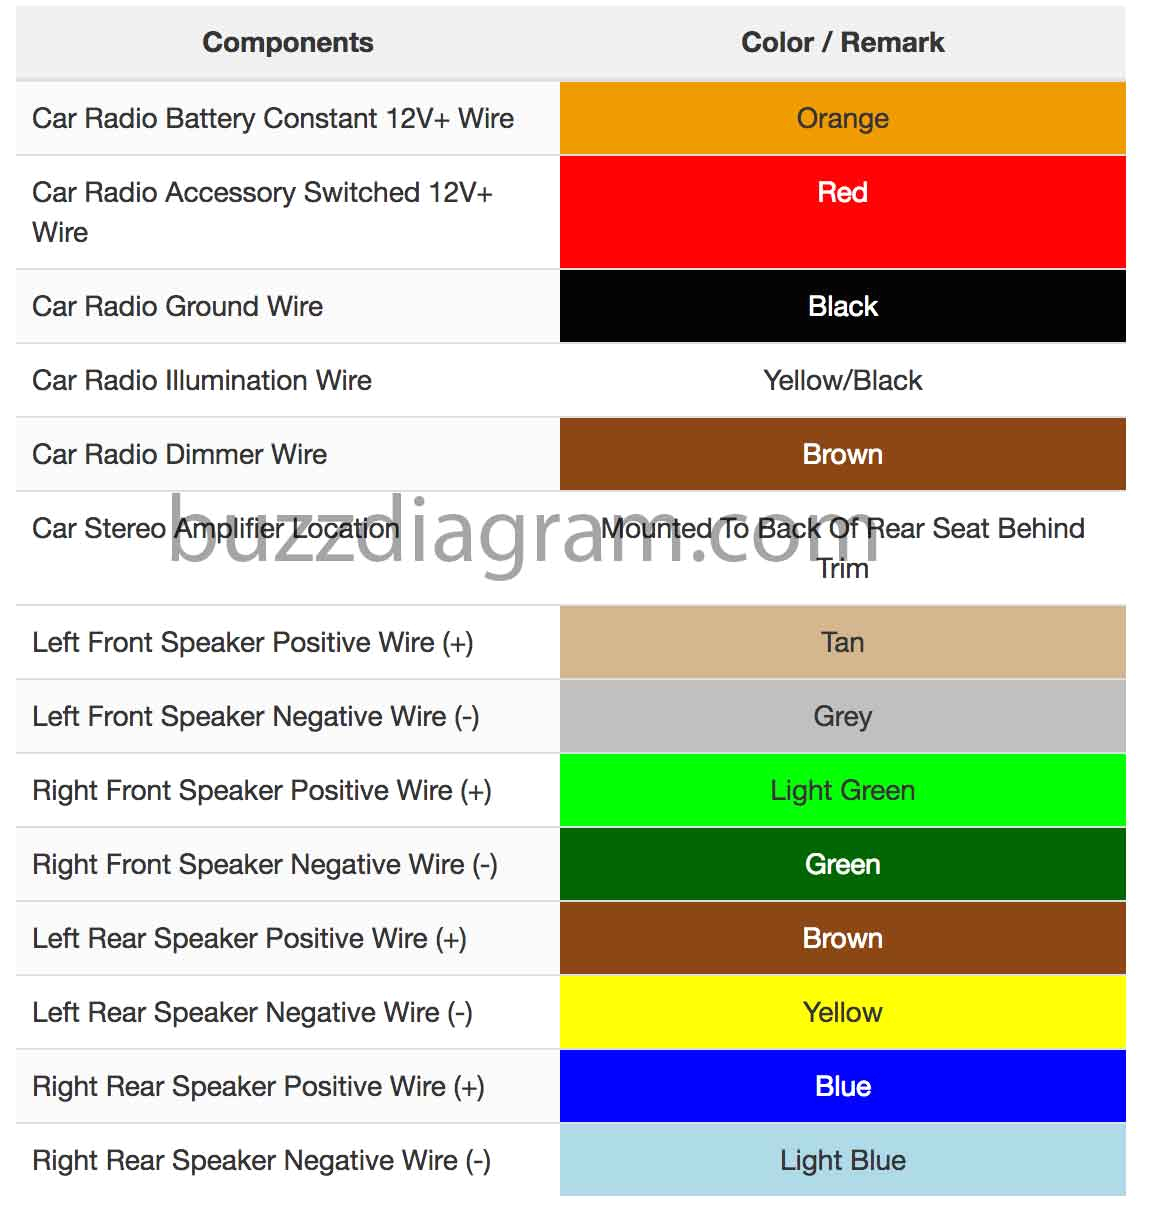 cadillac car stereo wiring color codes wiring diagrams favorites 1989 cadillac wiring harness color codes in stereo